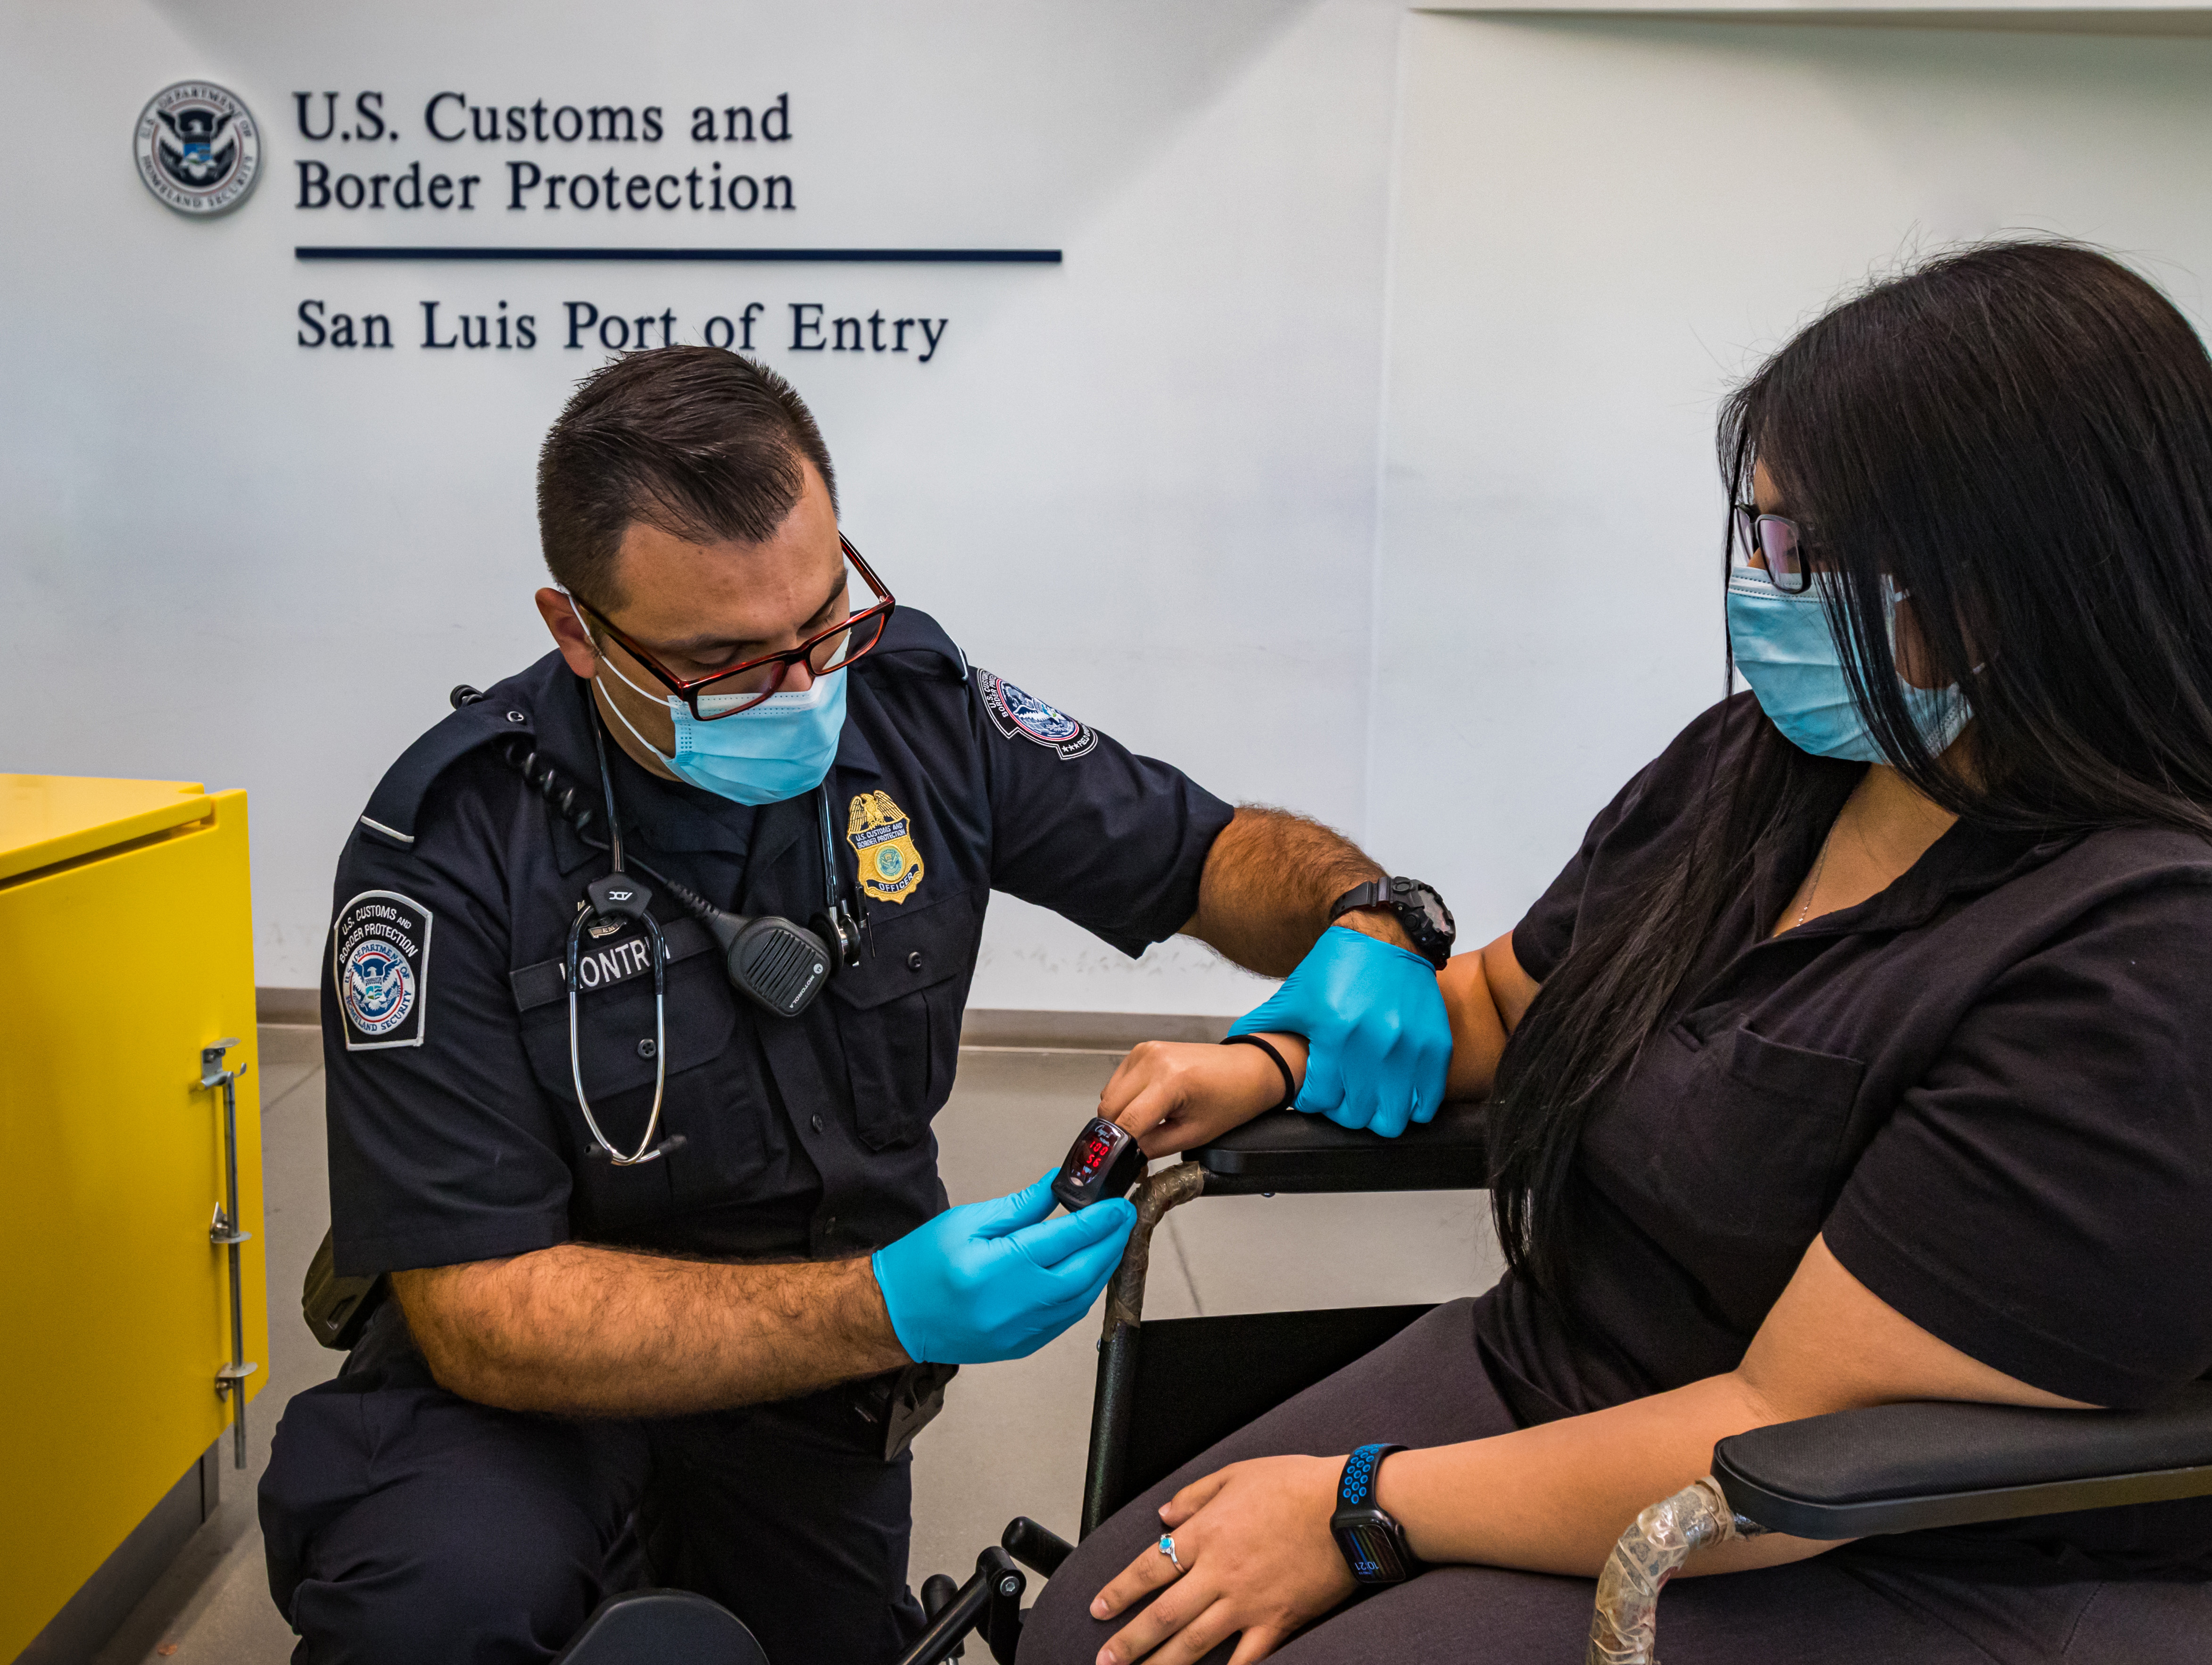 Hristijan Kontrin helps a patient at the Port of Entry San Luis, Arizona.